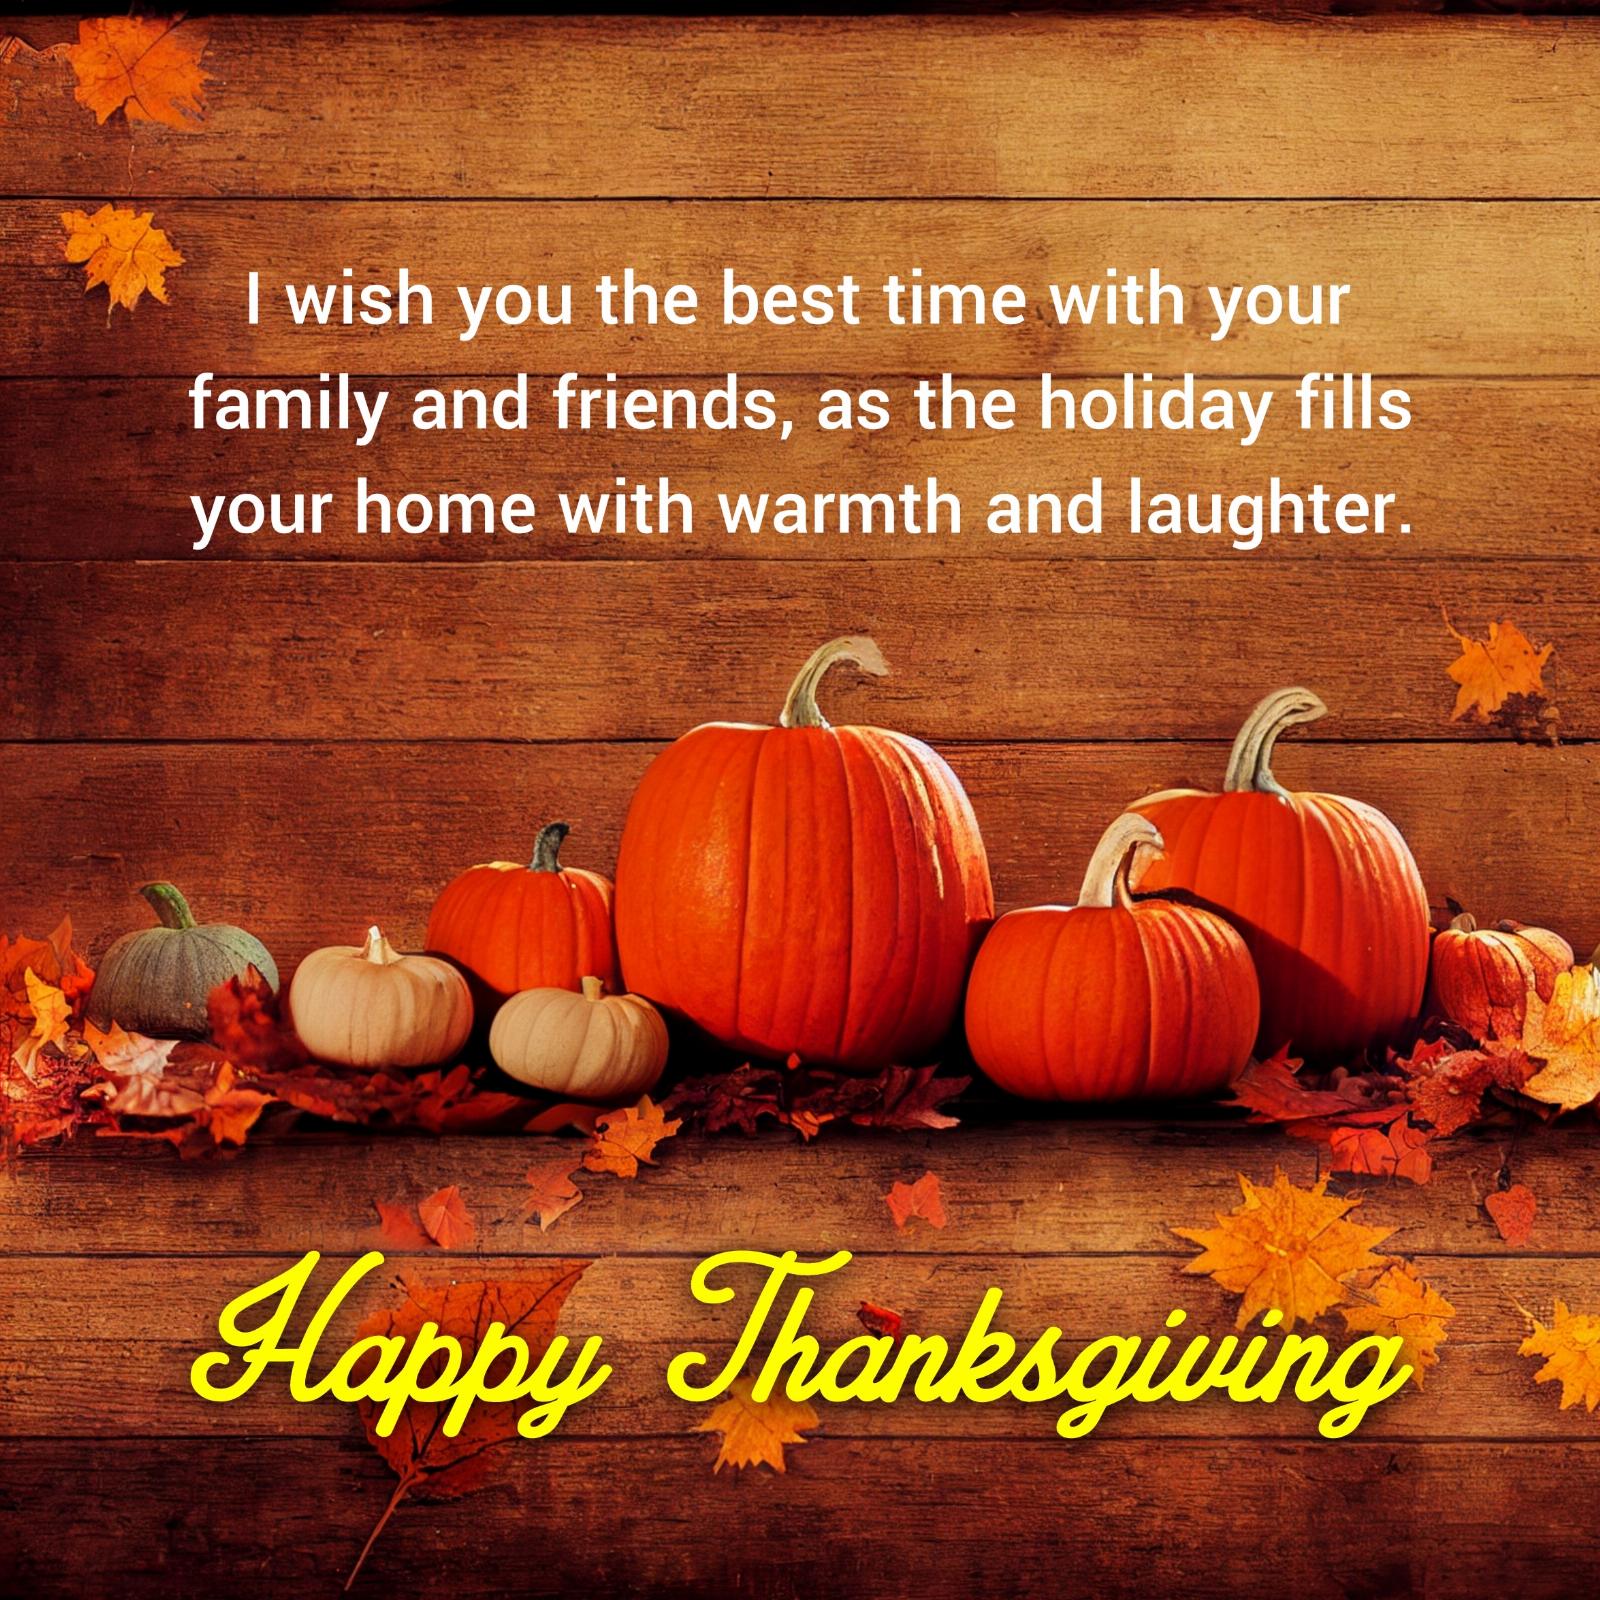 I wish you the best time with your family and friends